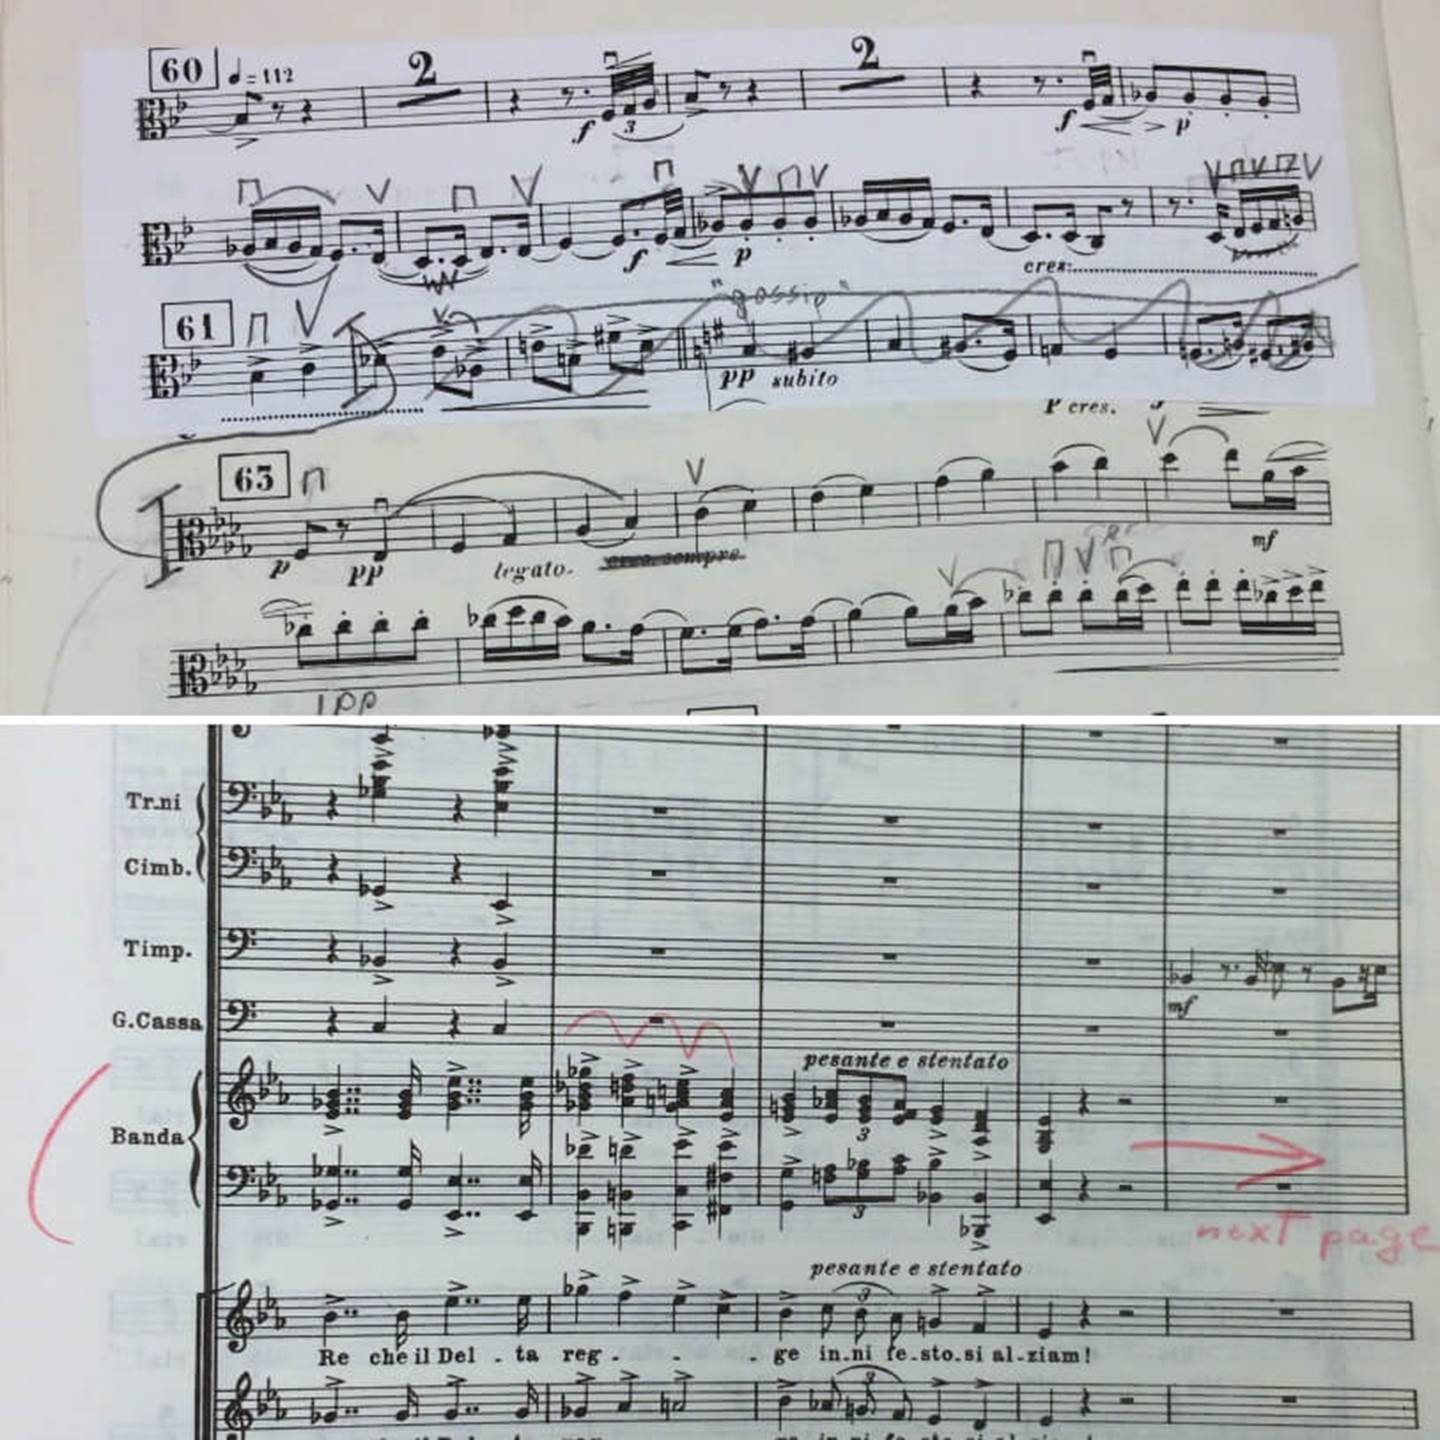 Examples of Carrie’s work this fall. On top, an example of an insert to a part of Butterfly; below an indication of Verdi’s writing for ‘banda’ in Aida—without any instrumentation listed.